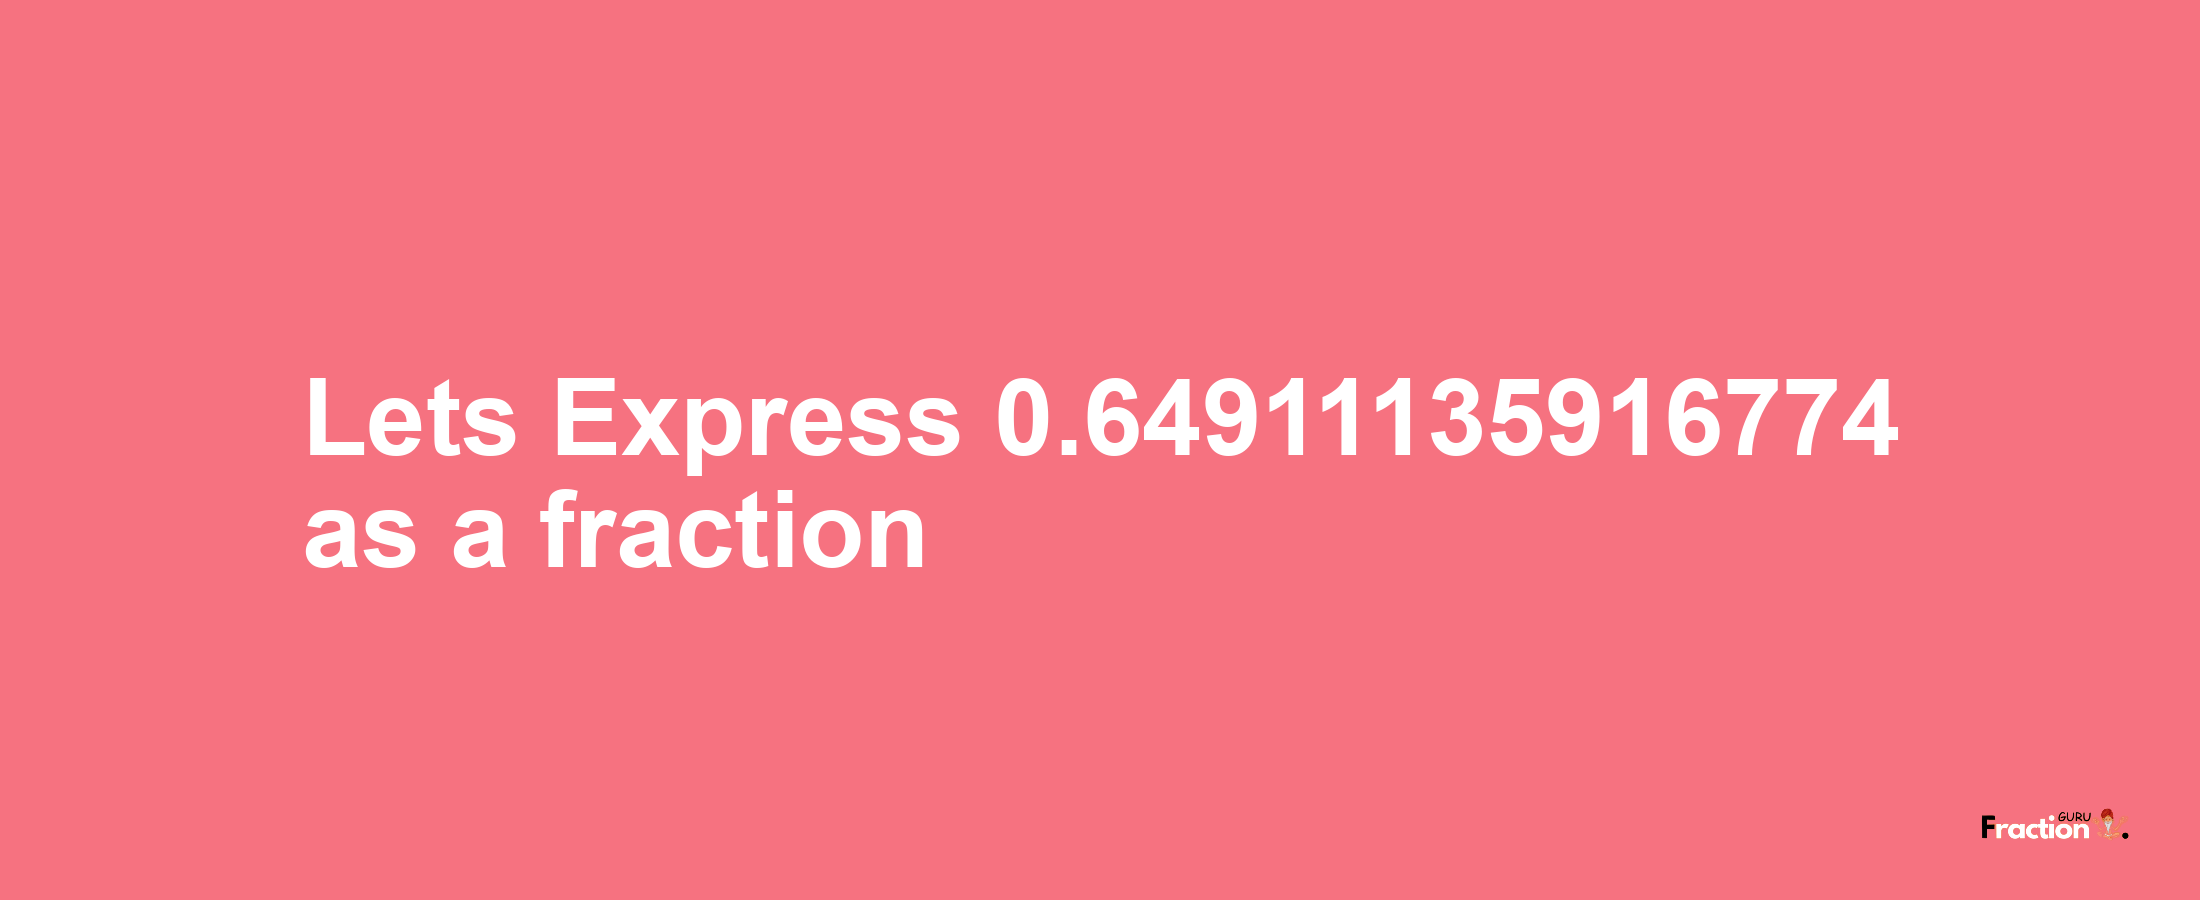 Lets Express 0.64911135916774 as afraction